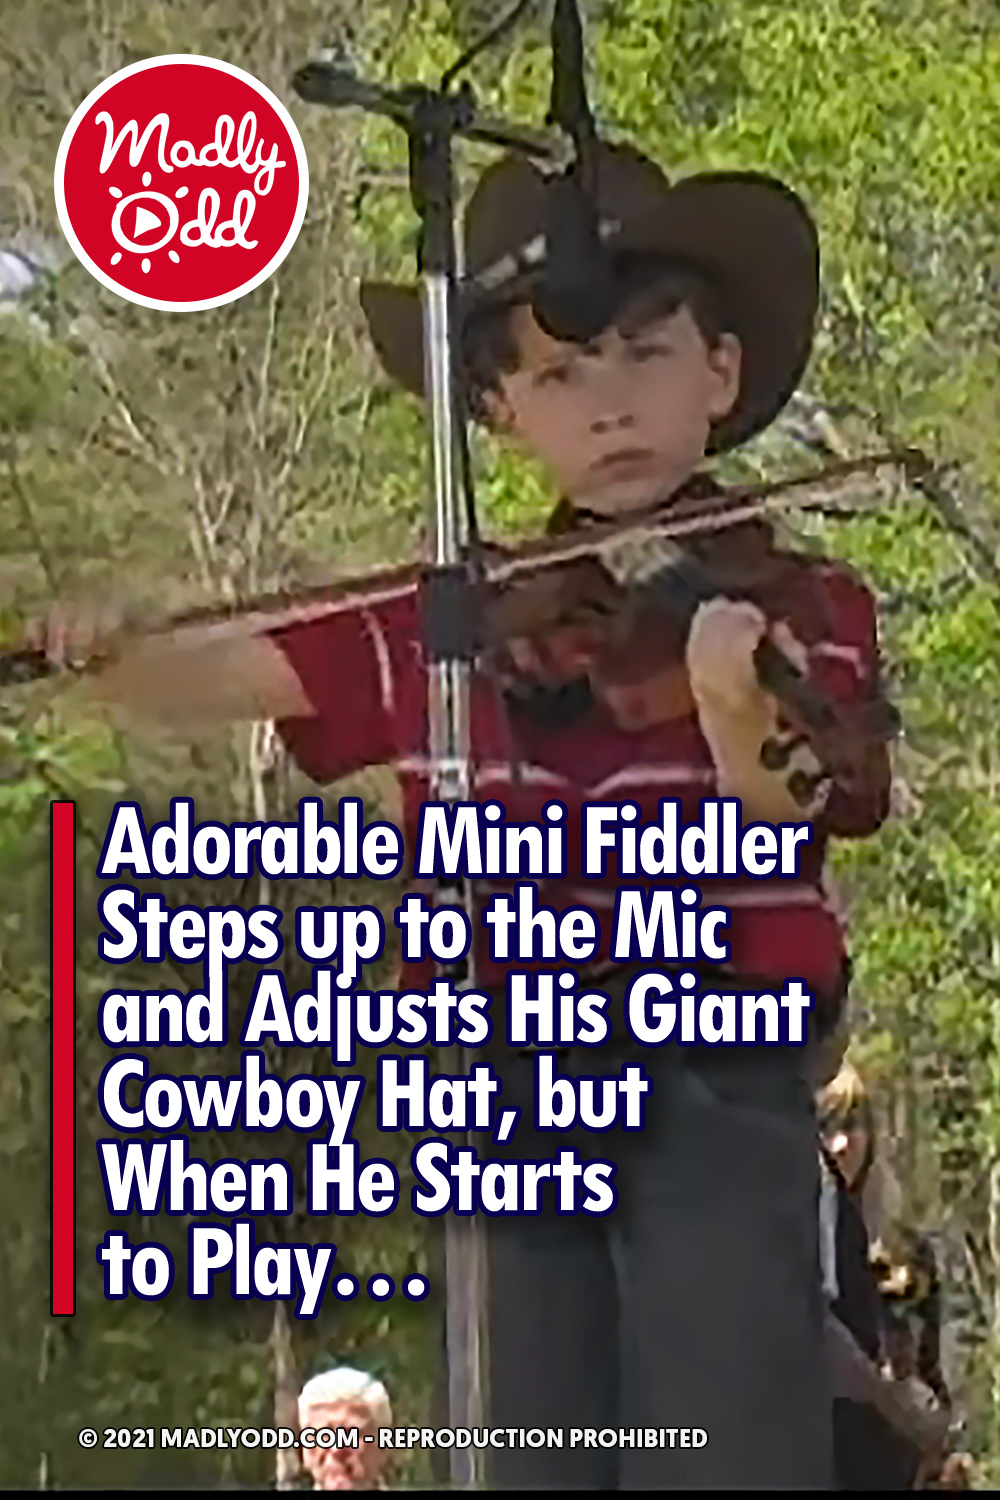 Adorable Mini Fiddler Steps up to the Mic and Adjusts His Giant Cowboy Hat, but When He Starts to Play...